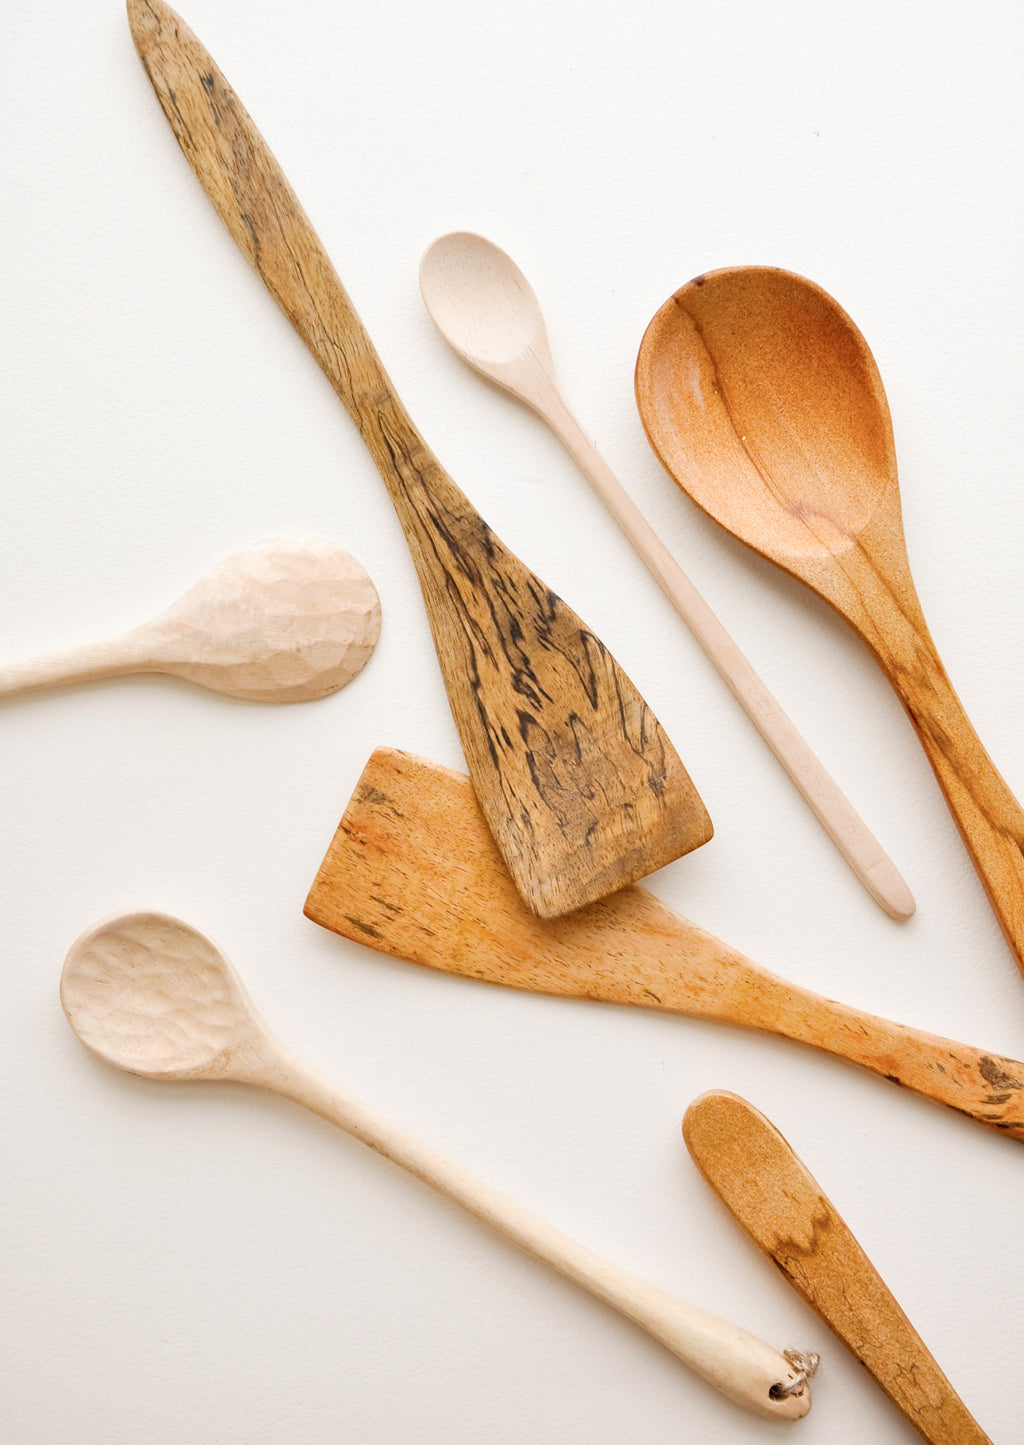 1: Wooden spoons of different colors, shapes, and sizes displayed in a haphazard d fashion.